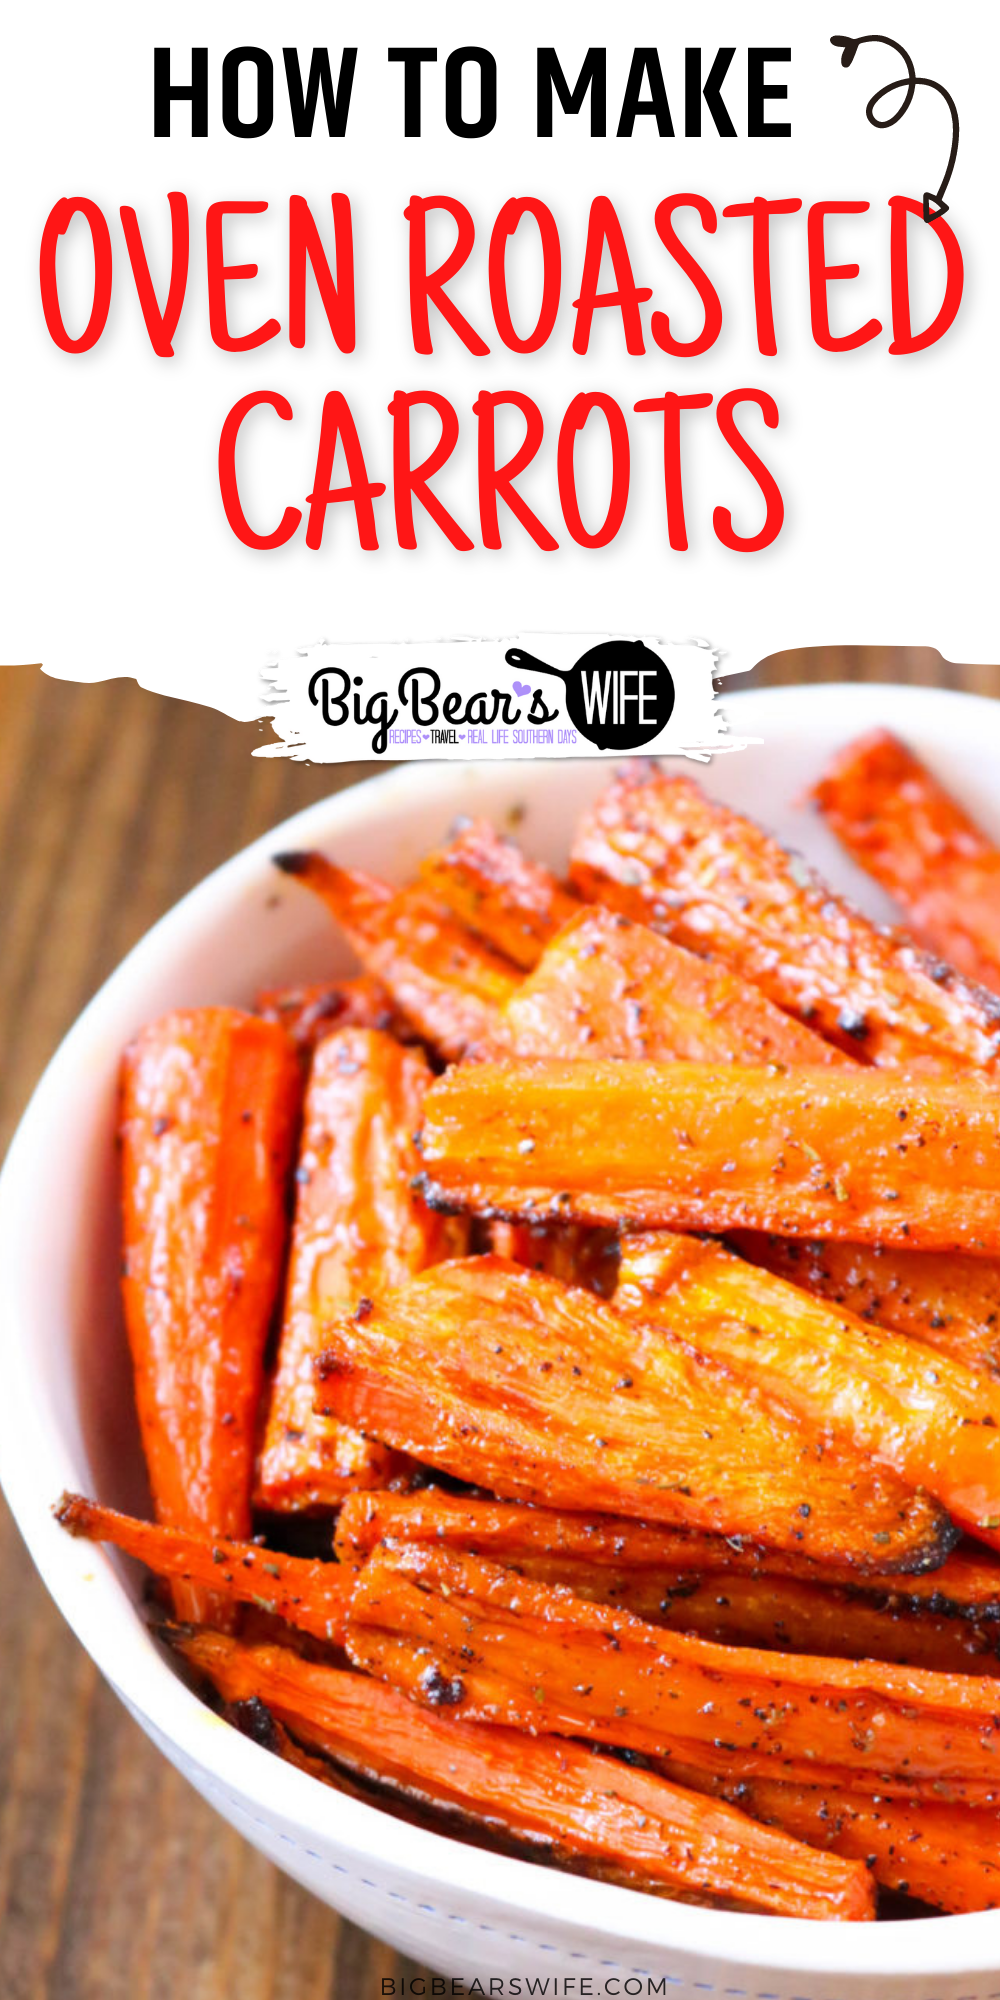  Oven Roasted Carrots - Oven Roasted Carrots make a great side dish that pairs perfect with almost any main course! These cooked carrots are oven roasted with a few seasonings and can be customized to use your favorites from the spice drawer! Ready in under 45 minutes and perfect for weeknights, weekends and meal prep!  via @bigbearswife